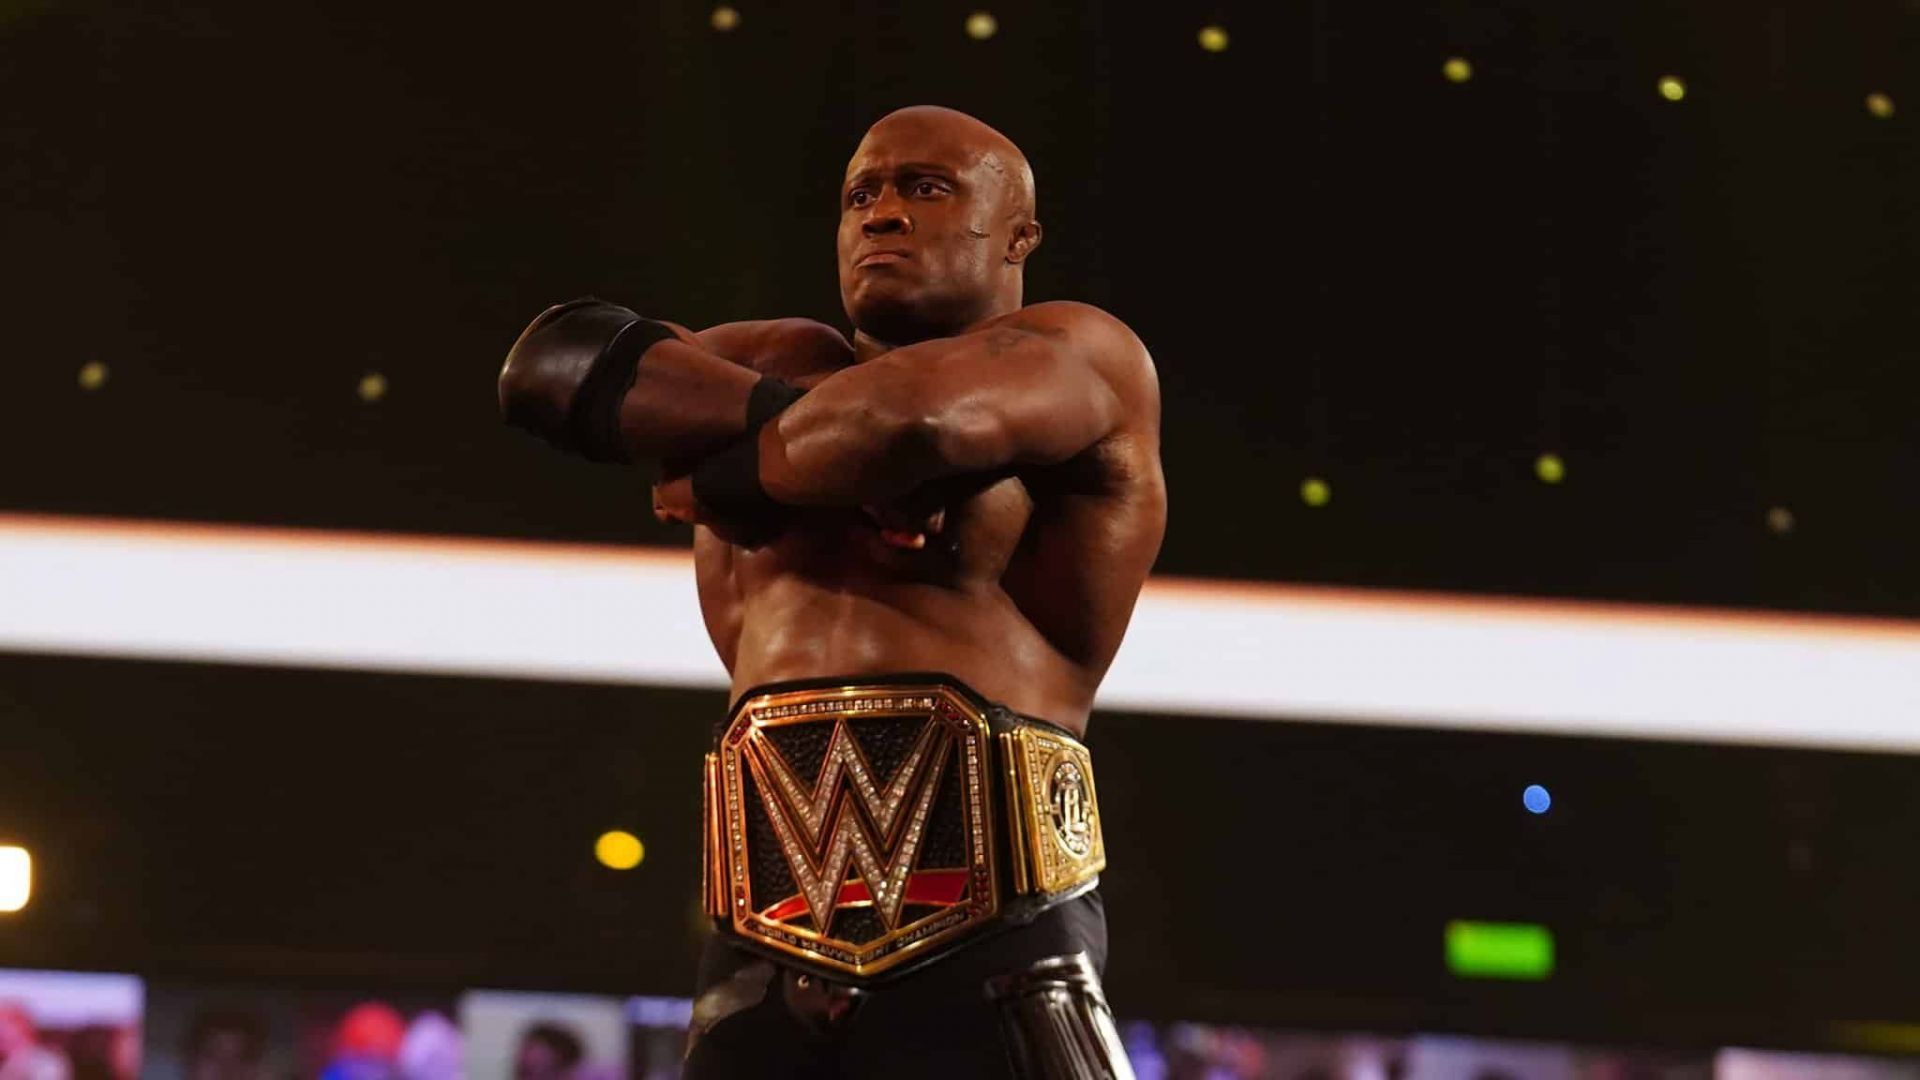 Lashley learned a lot from the iconic superstar